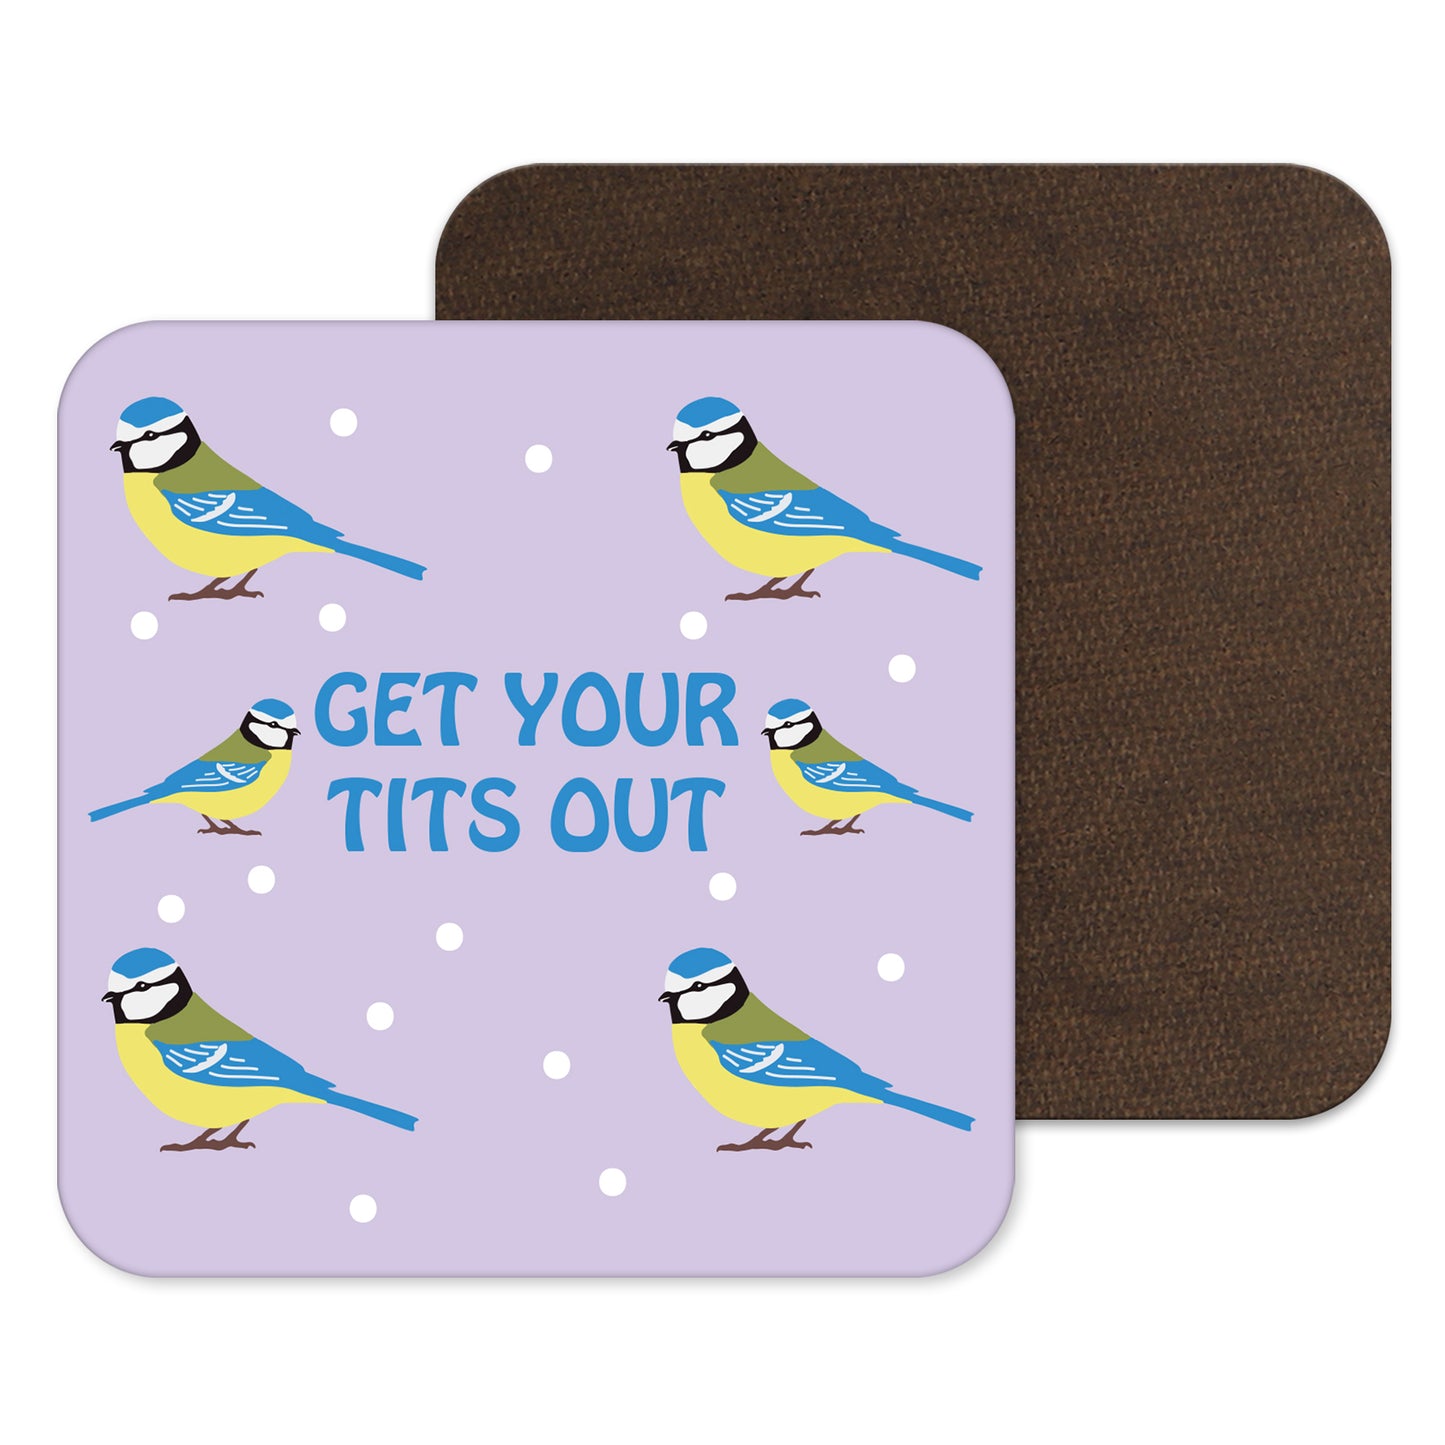 Get Your Tits Out Coaster